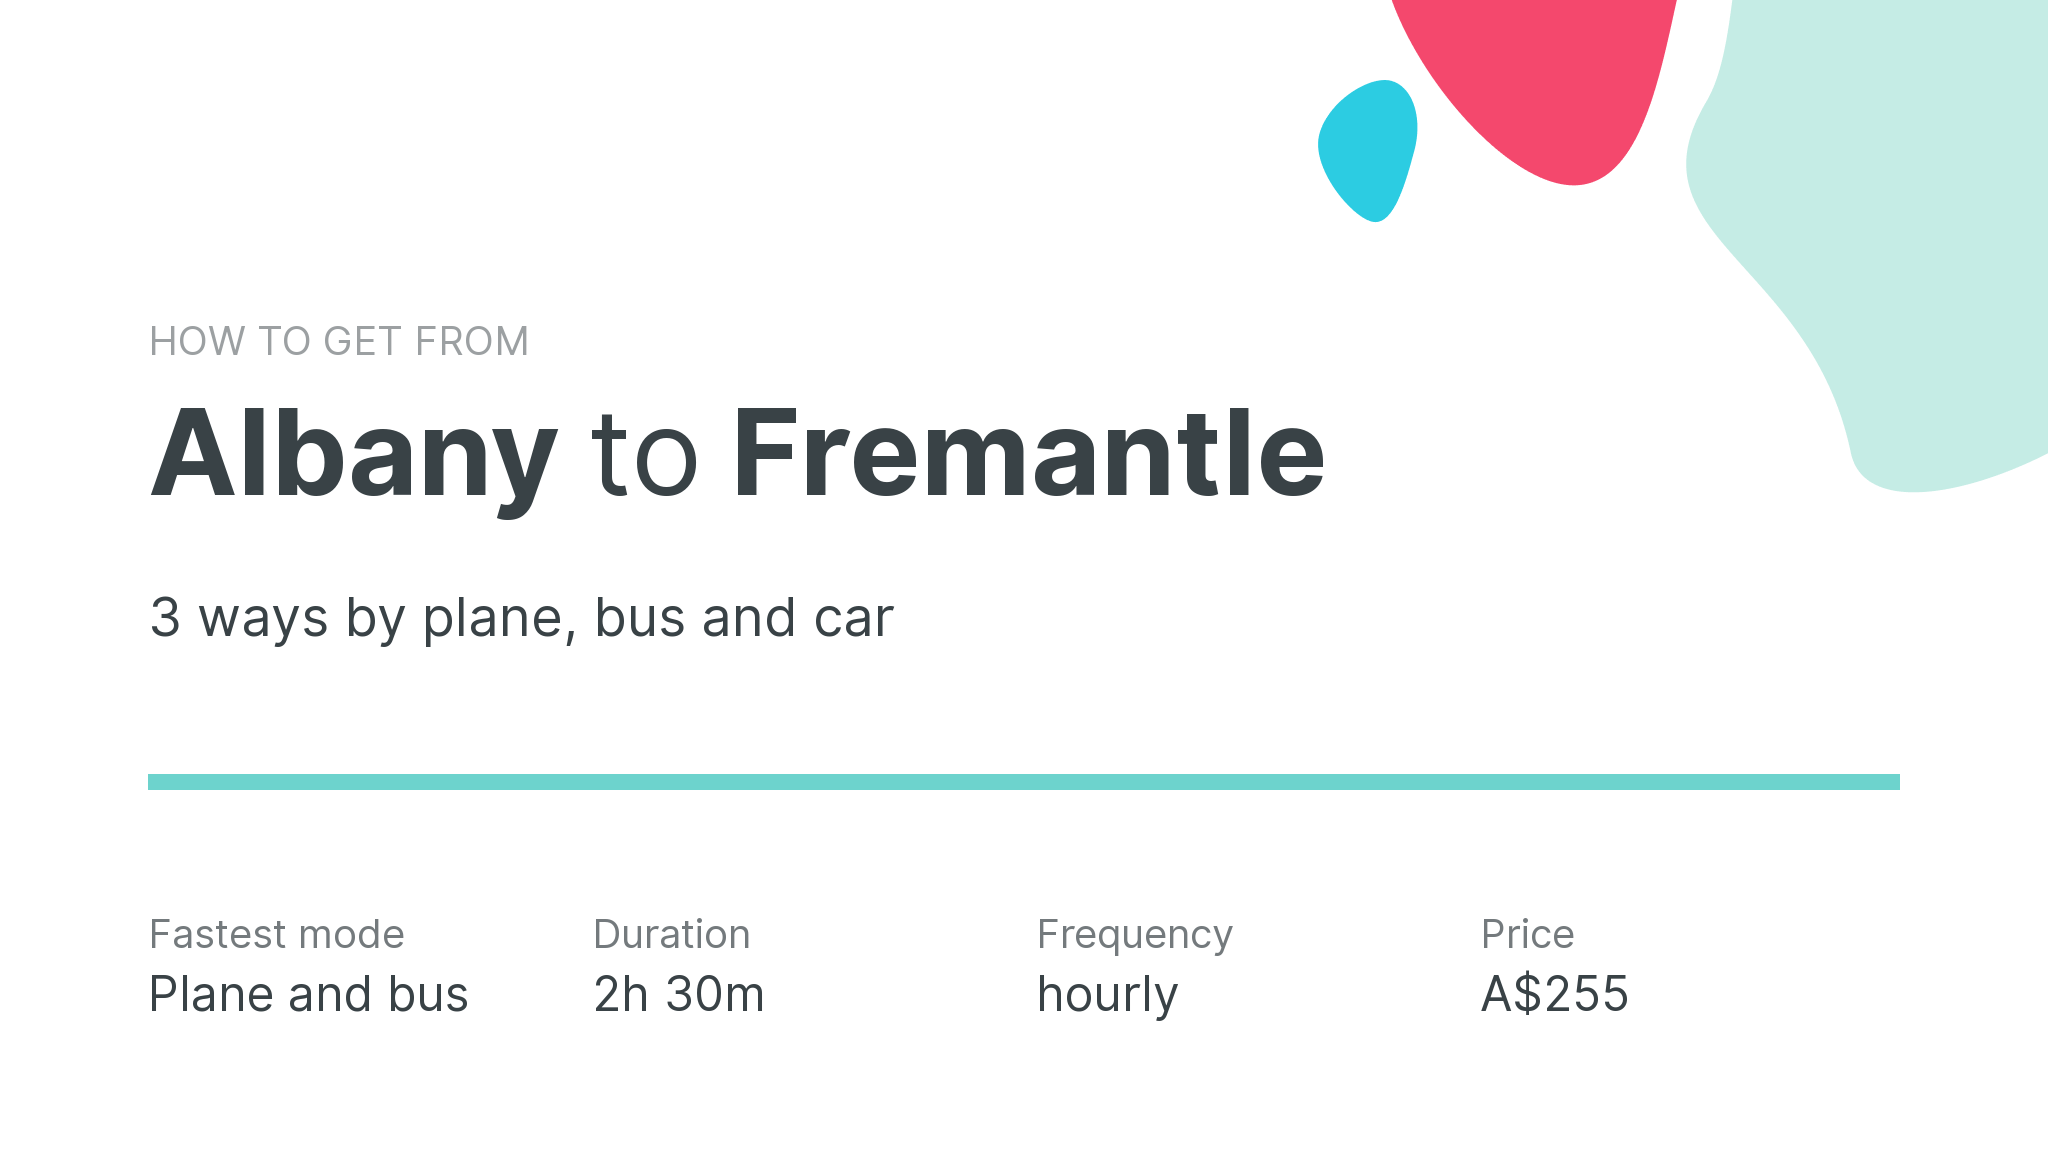 How do I get from Albany to Fremantle